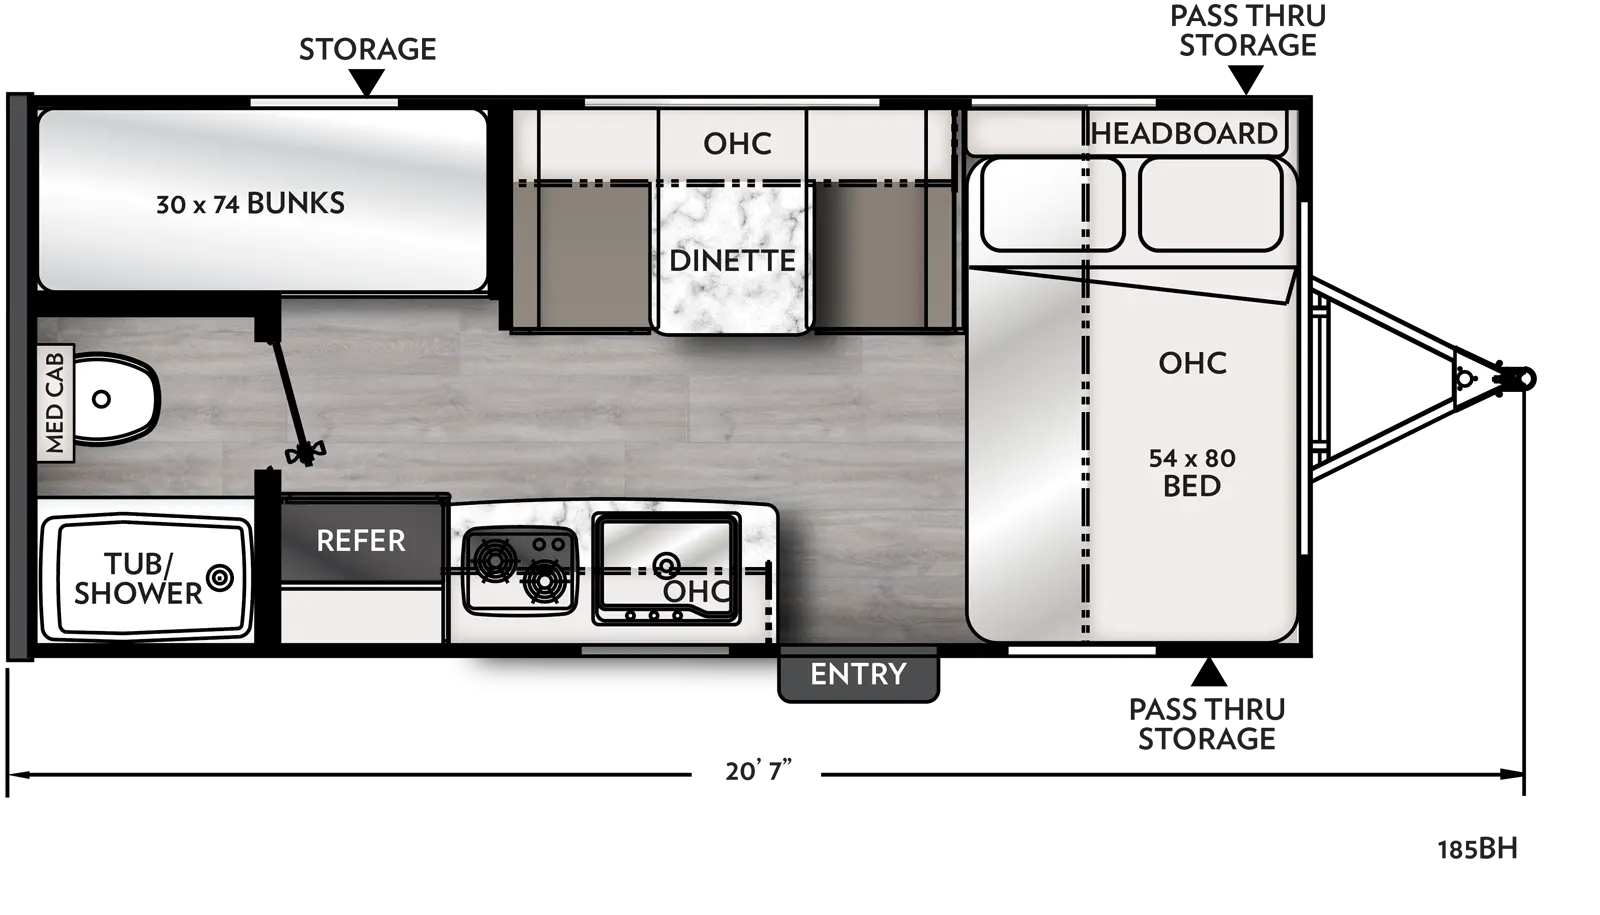 The 185BH has no slide outs and one entry door on the door side. Interior layout from front to back: front bedroom with side-facing bed and overhead cabinet; kitchen living dining area; dinette on the off- door side with overhead cabinet; door side kitchen with sink, cook top stove, overhead cabinet, microwave below, and refrigerator; door side rear bathroom; two bunk beds on of the off-door side. 